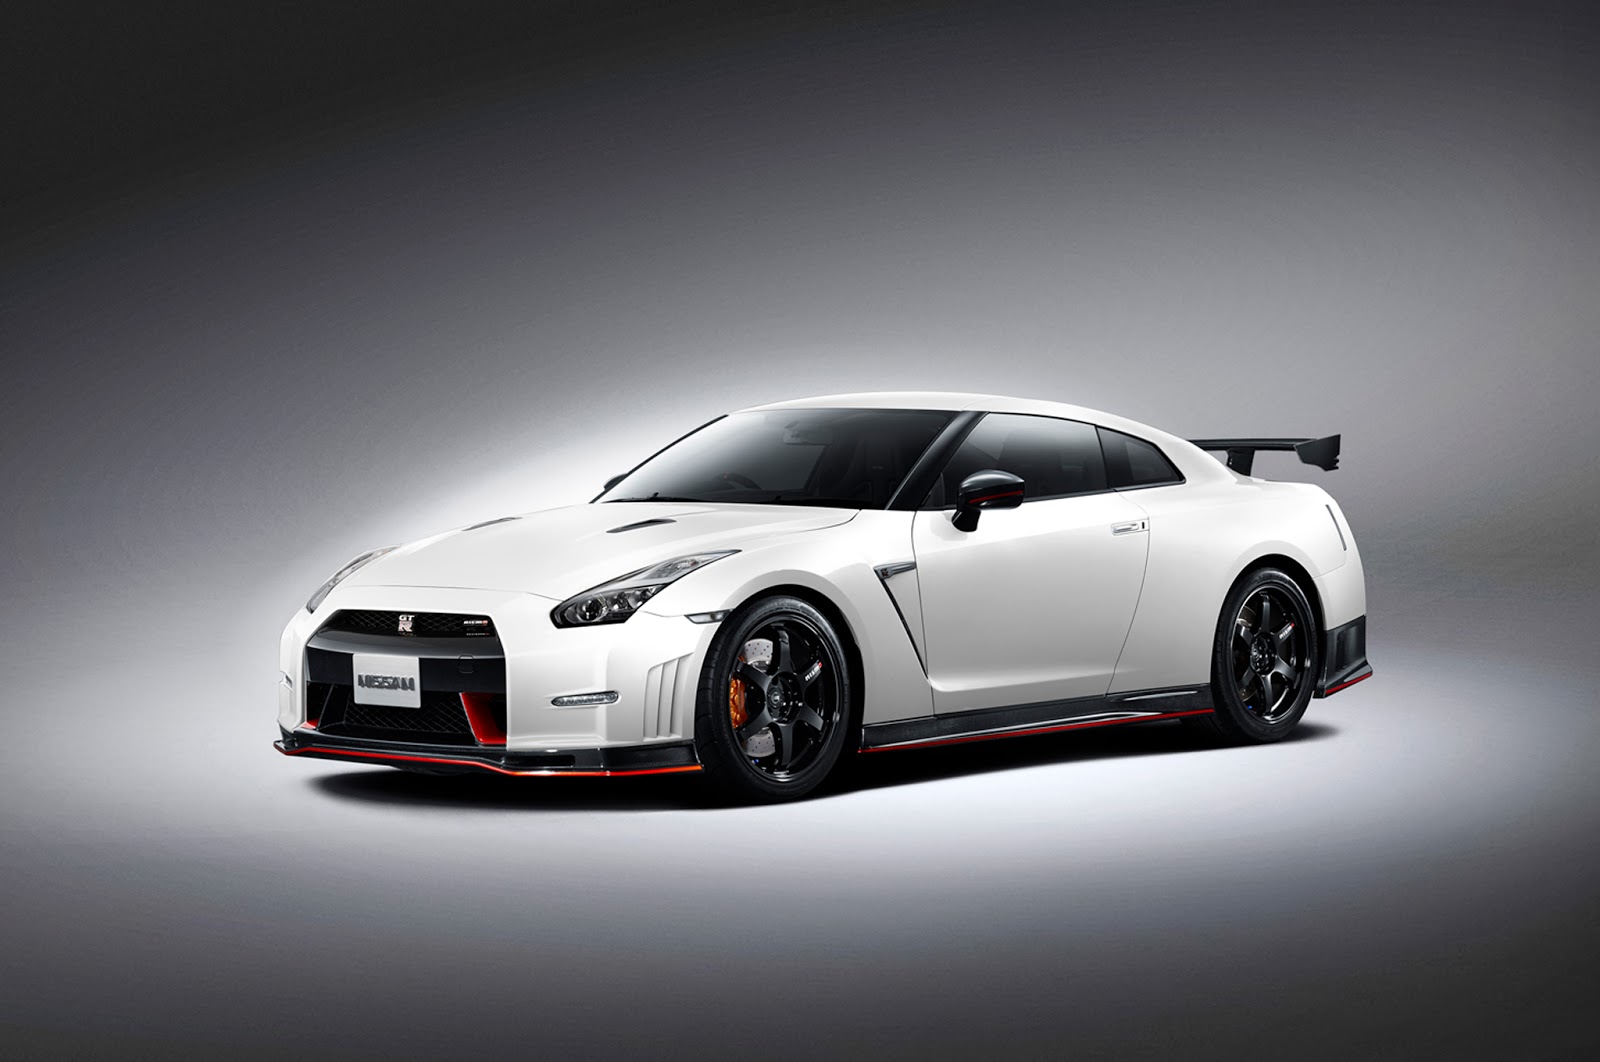 Nissan Gt R Nismo Re Specs And Pictures Auto